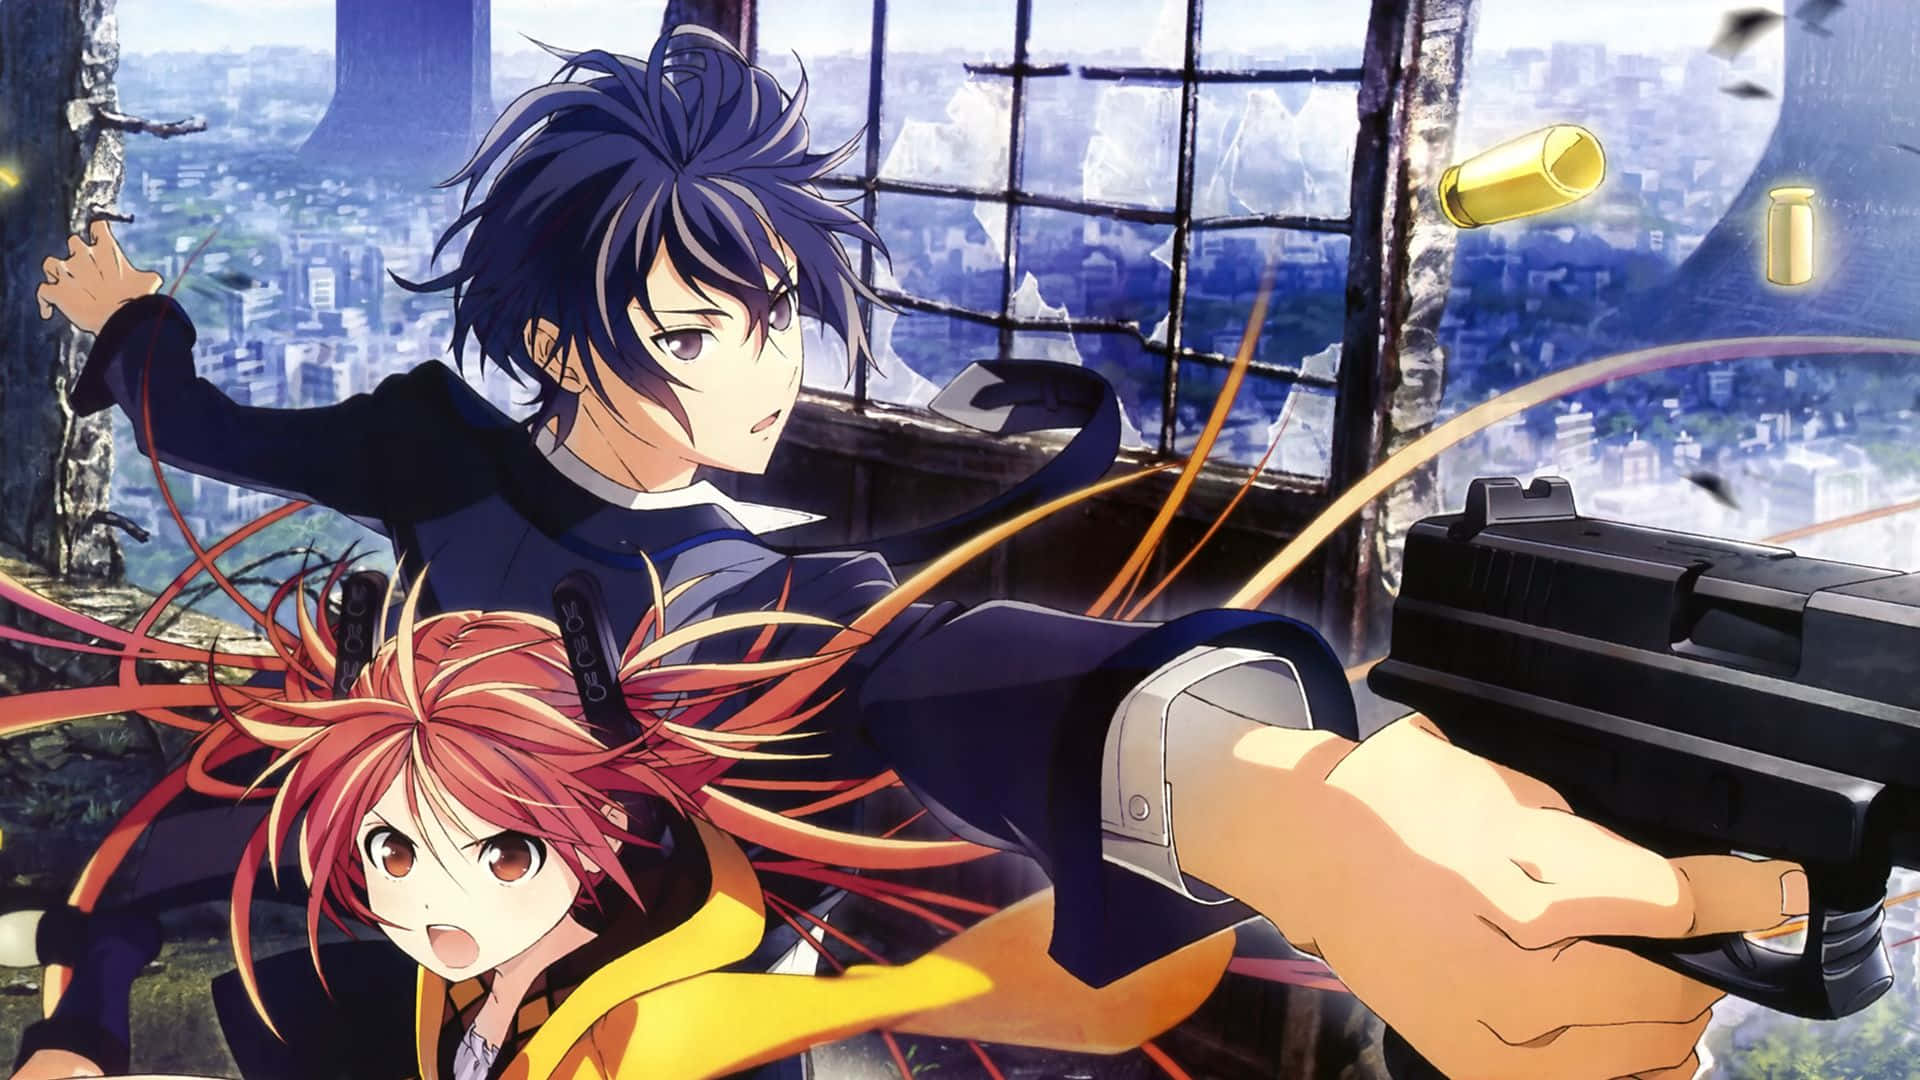 Fight Evil with a High-Tech Weapon – Black Bullet